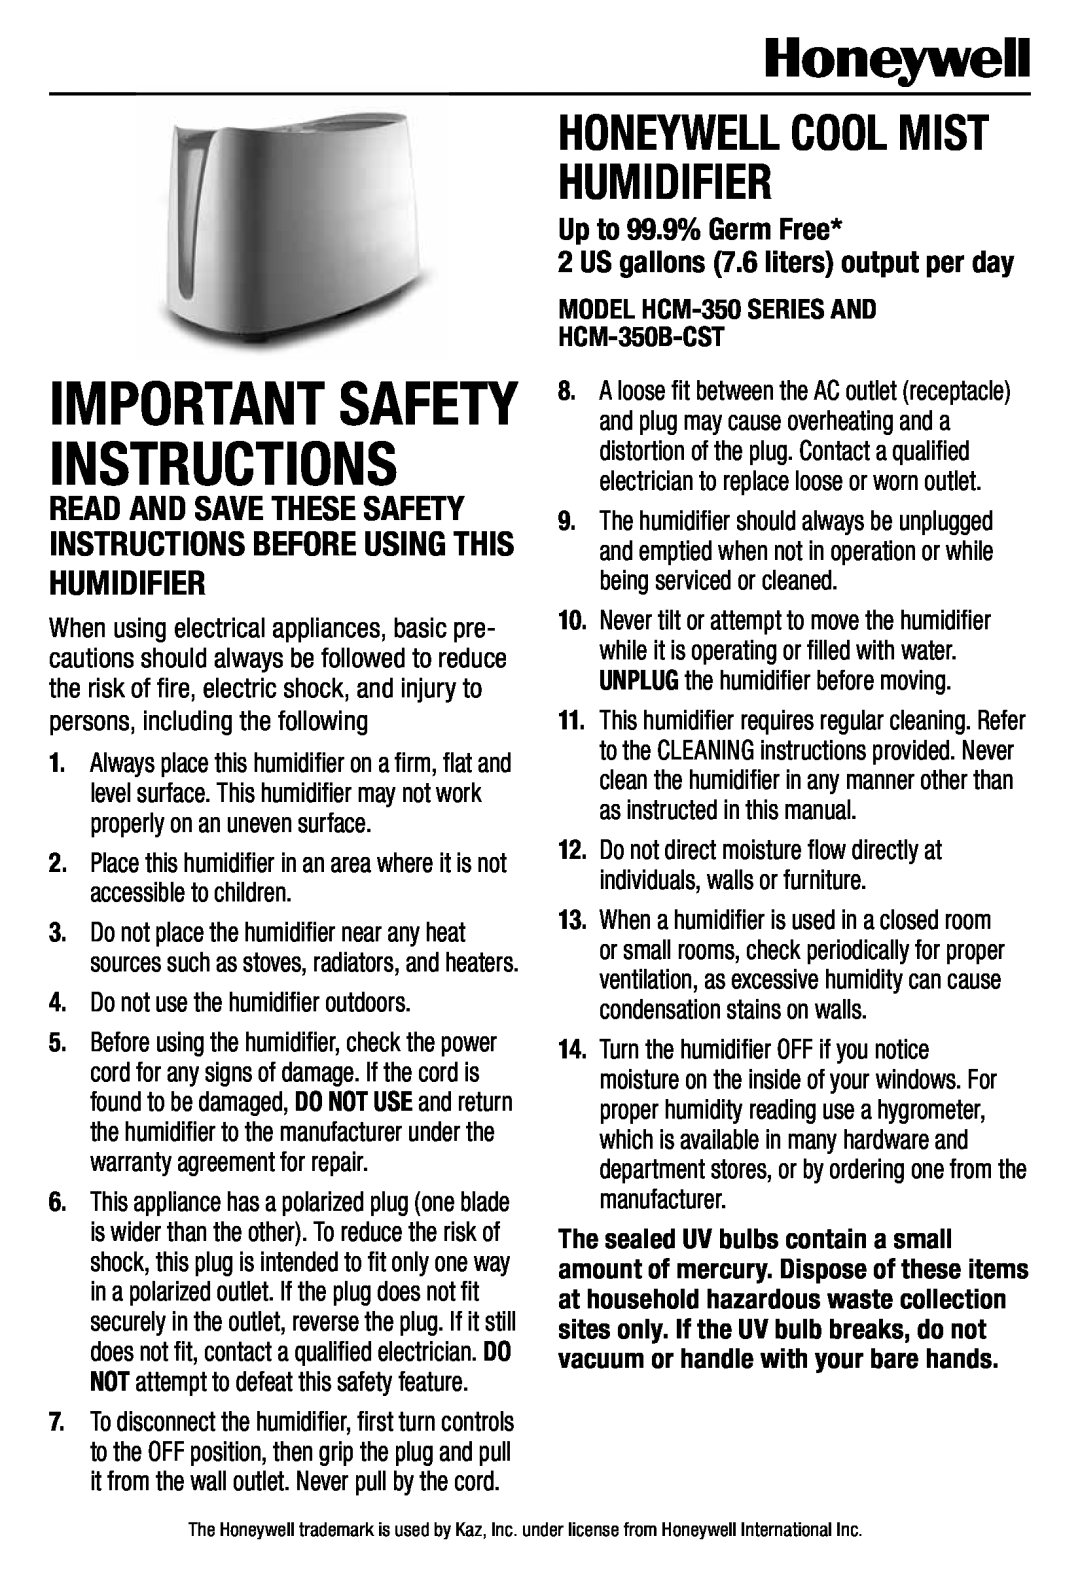 Honeywell HCM350 important safety instructions Up to 99.9% Germ Free, persons, including the following 